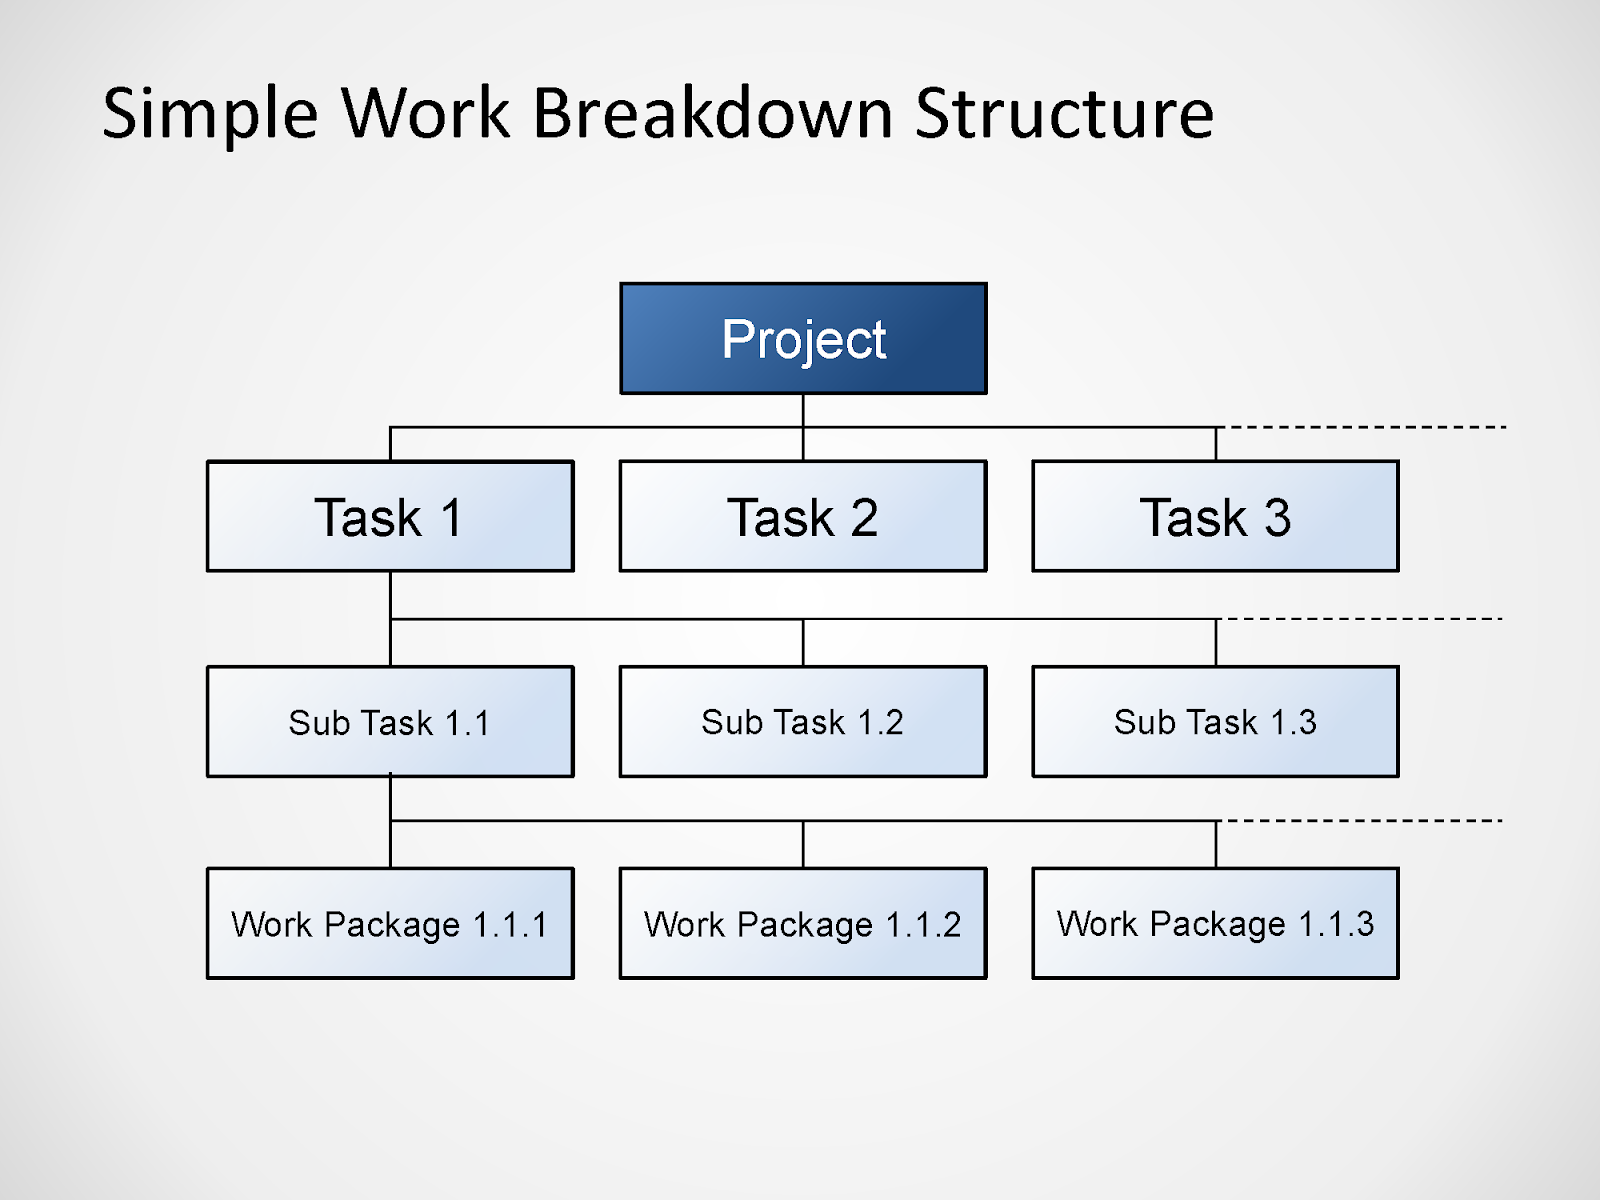 Simply works. WBS диаграмма. Project Breakdown structure. WBS структура. Work Breakdown structure of the Project.